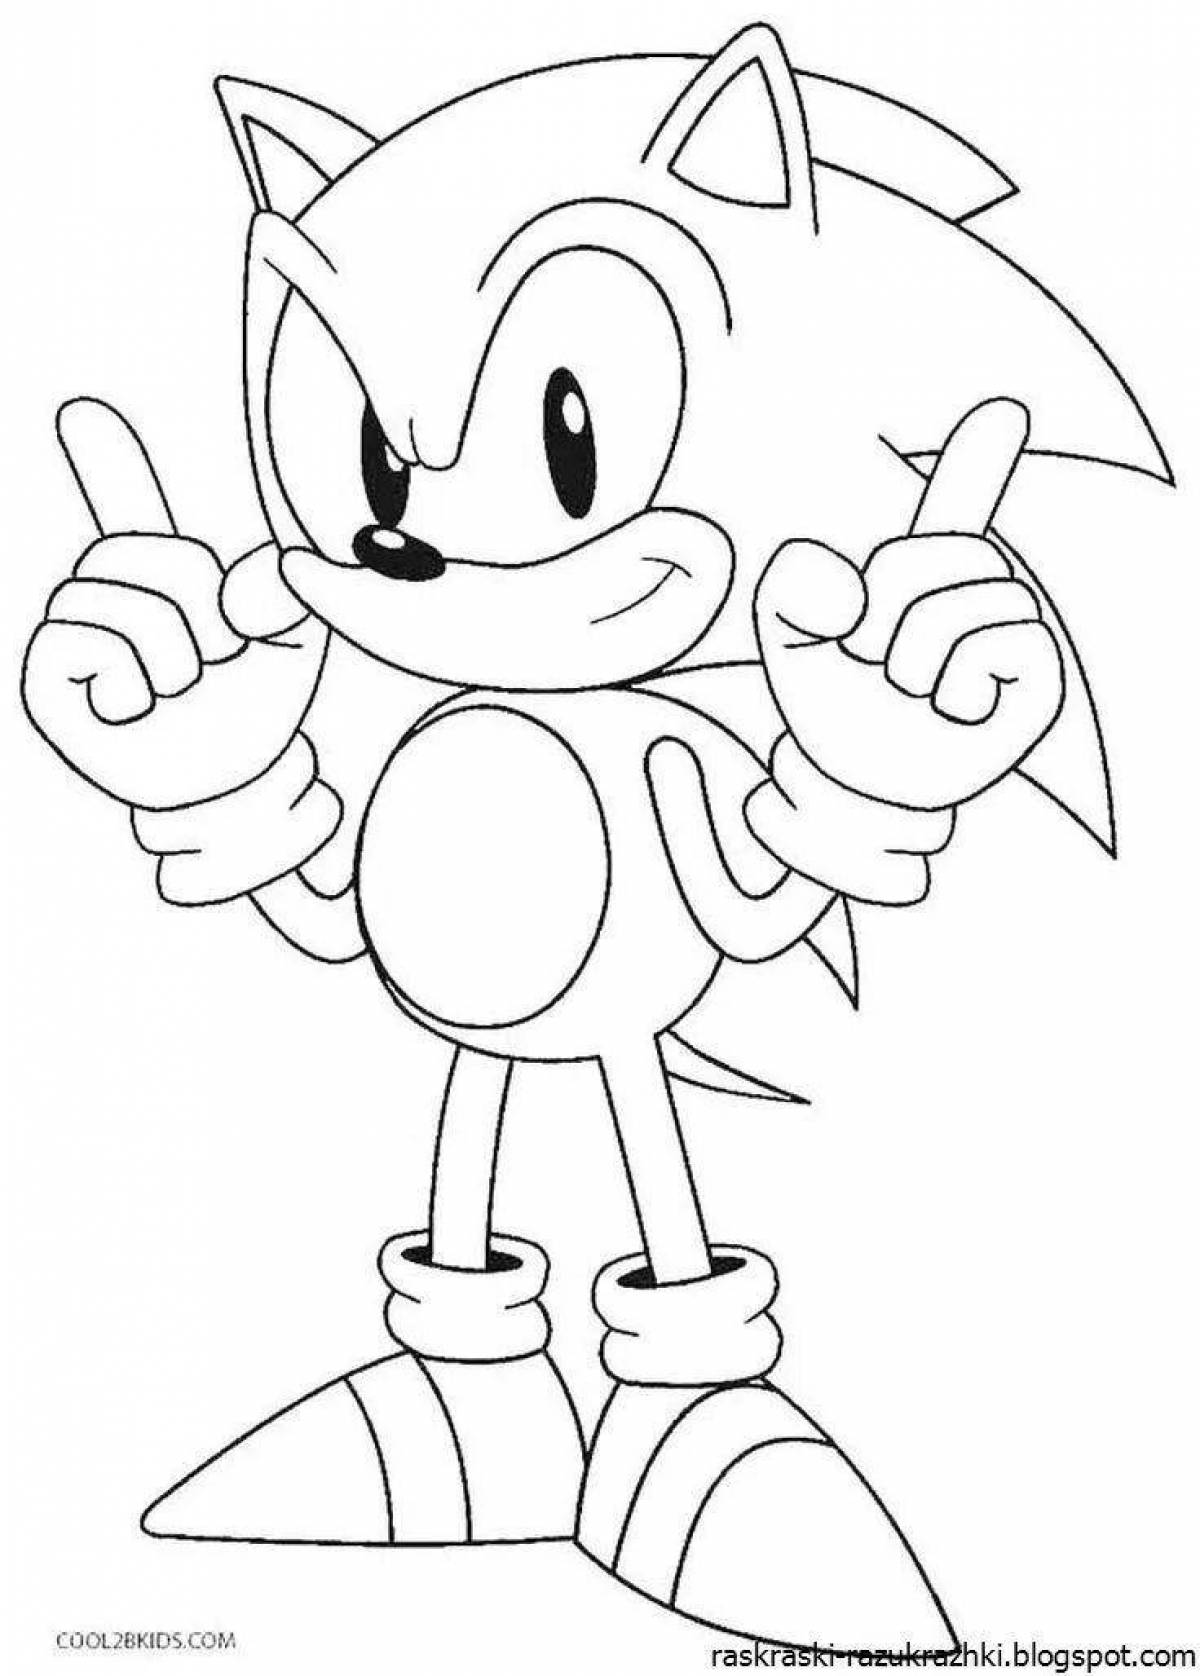 Great sonic boom coloring book